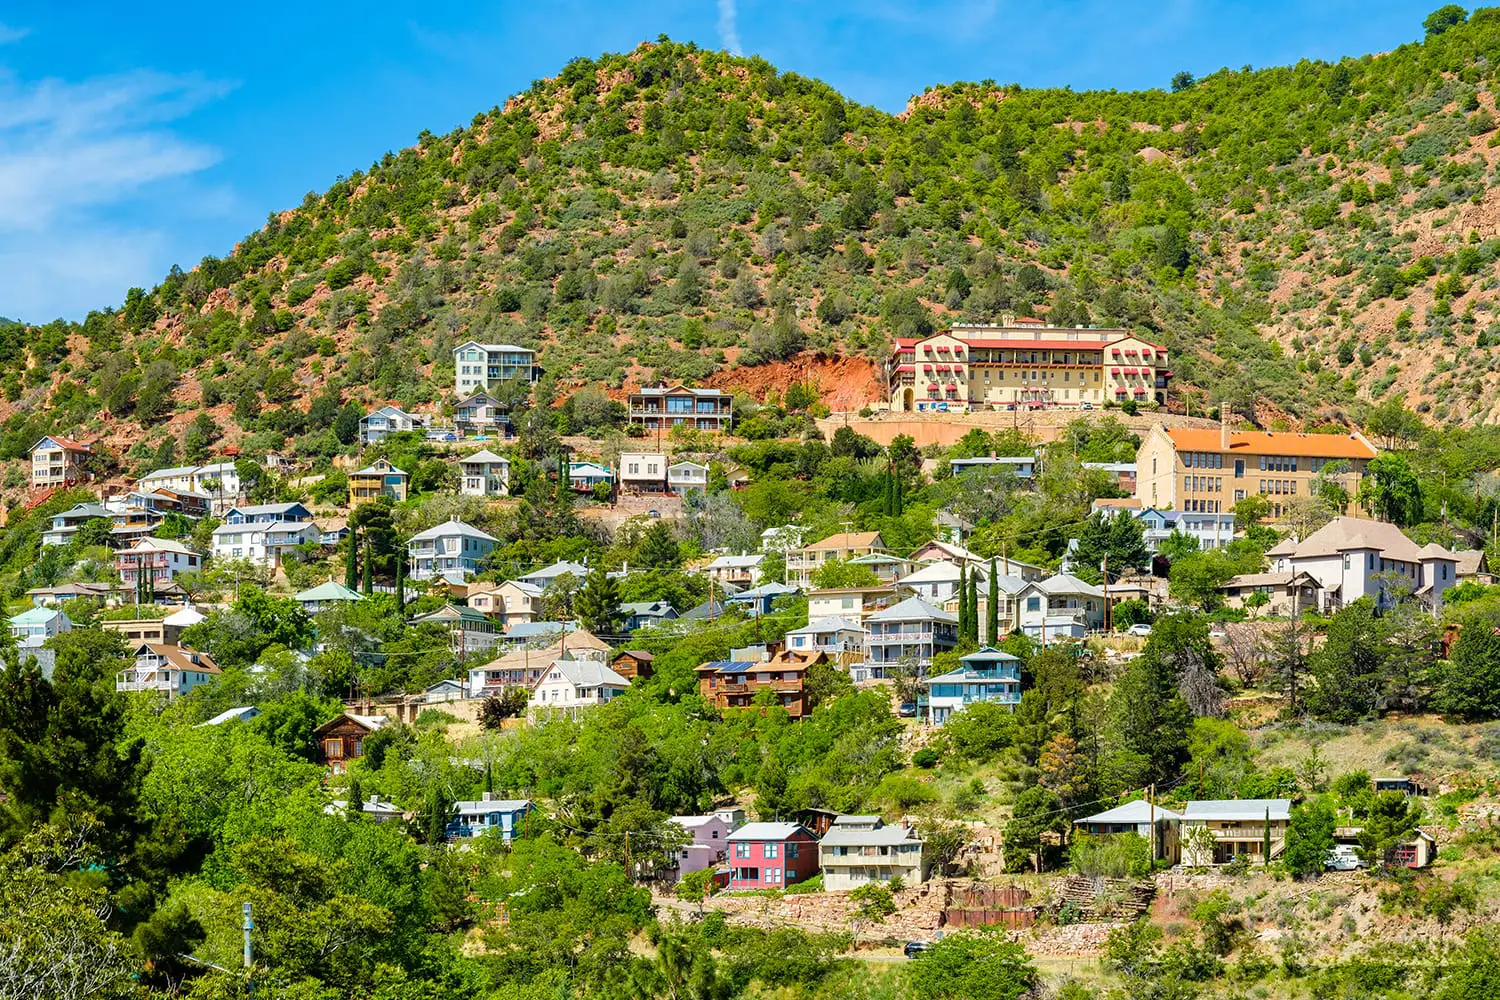 Scenic view of the popular mountain town of Jerome in Arizona.